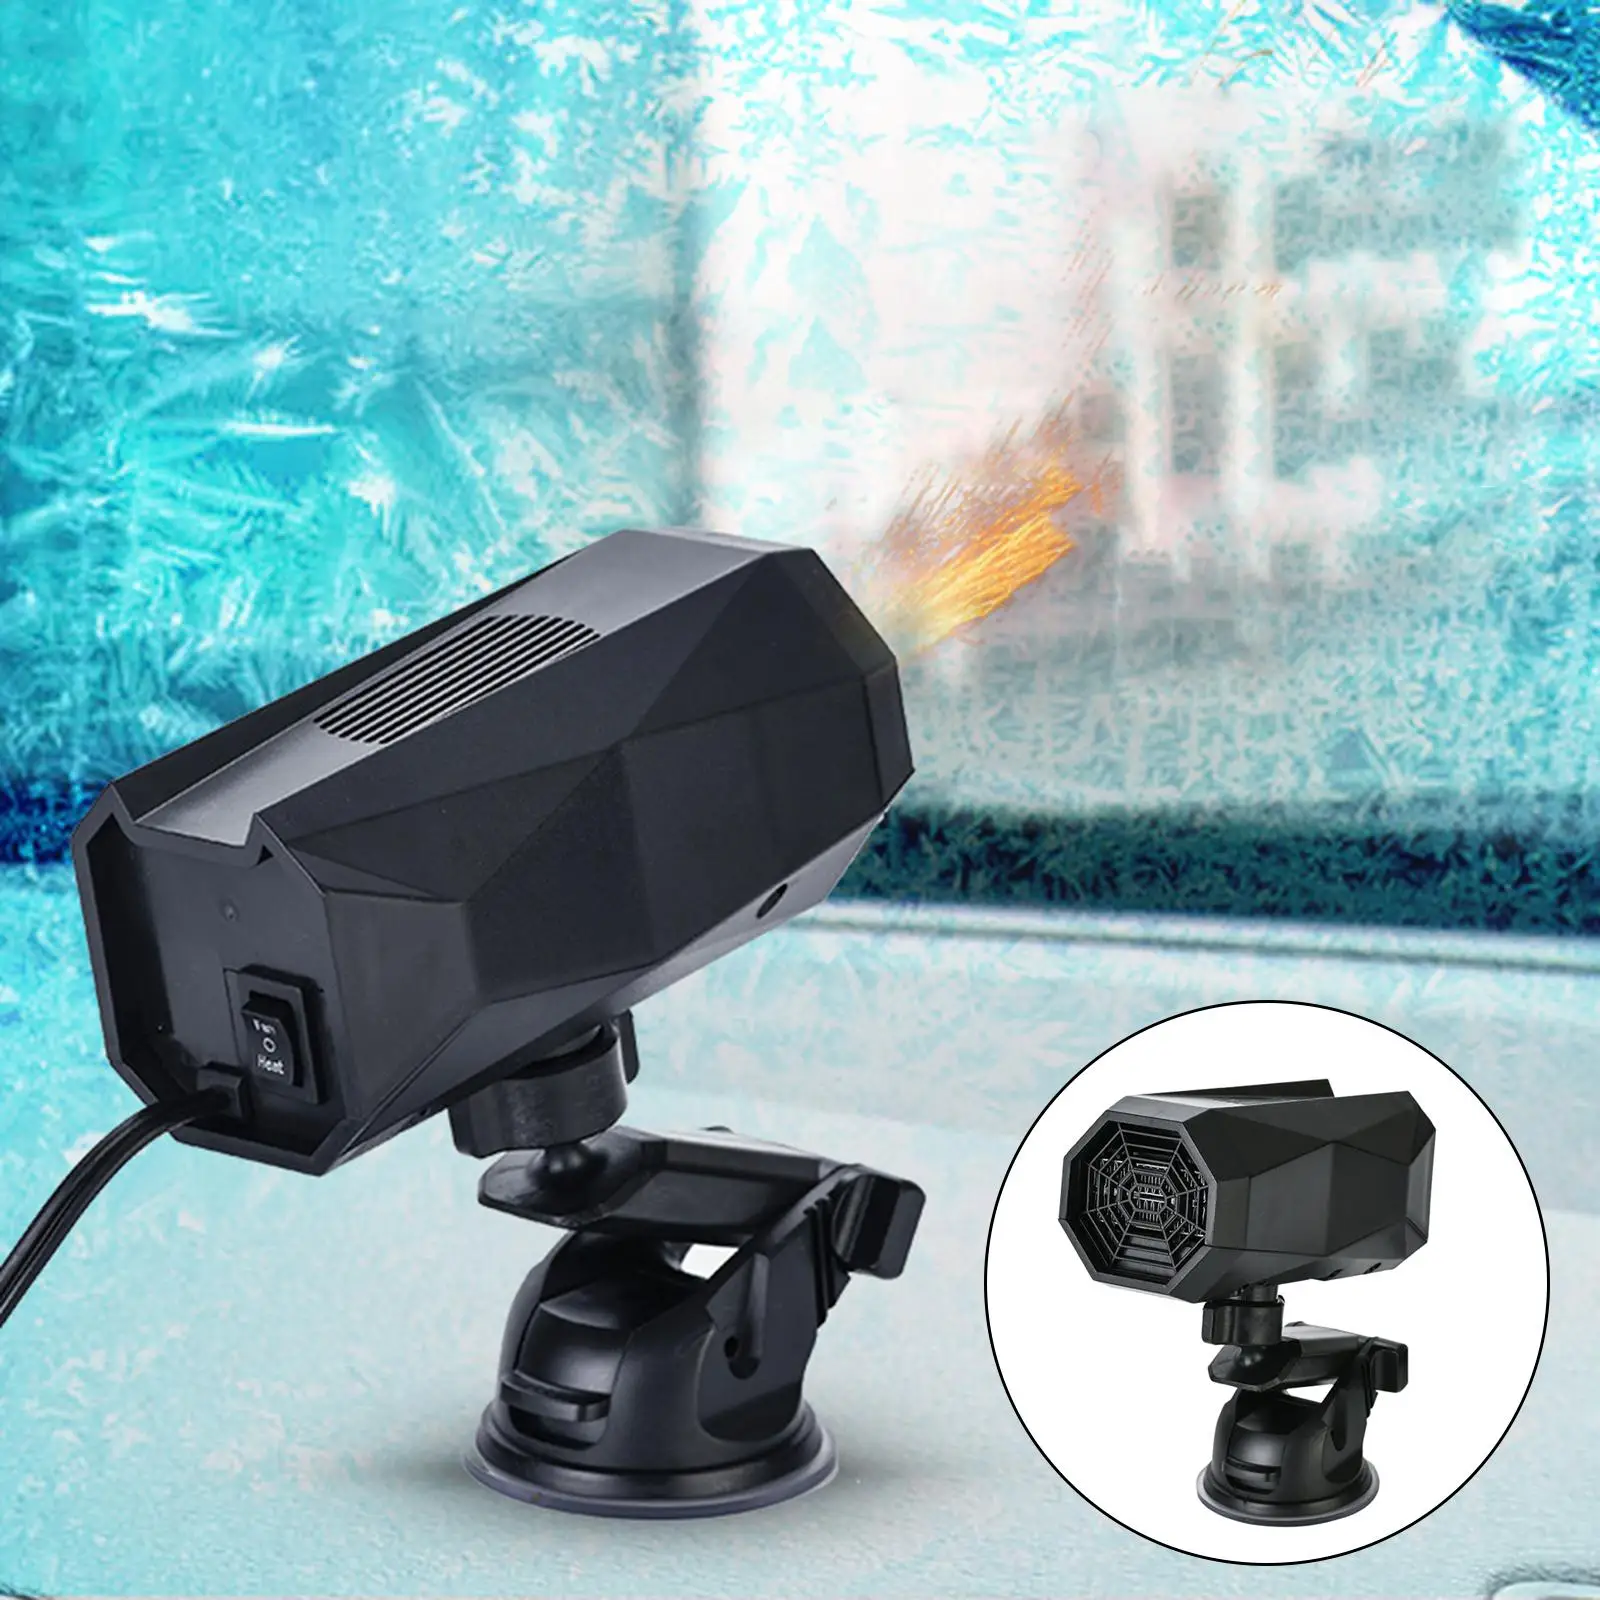  12 Heater 150  360 Rotatable Windshield Defroster Cig Lighter Plug  Driving Sight